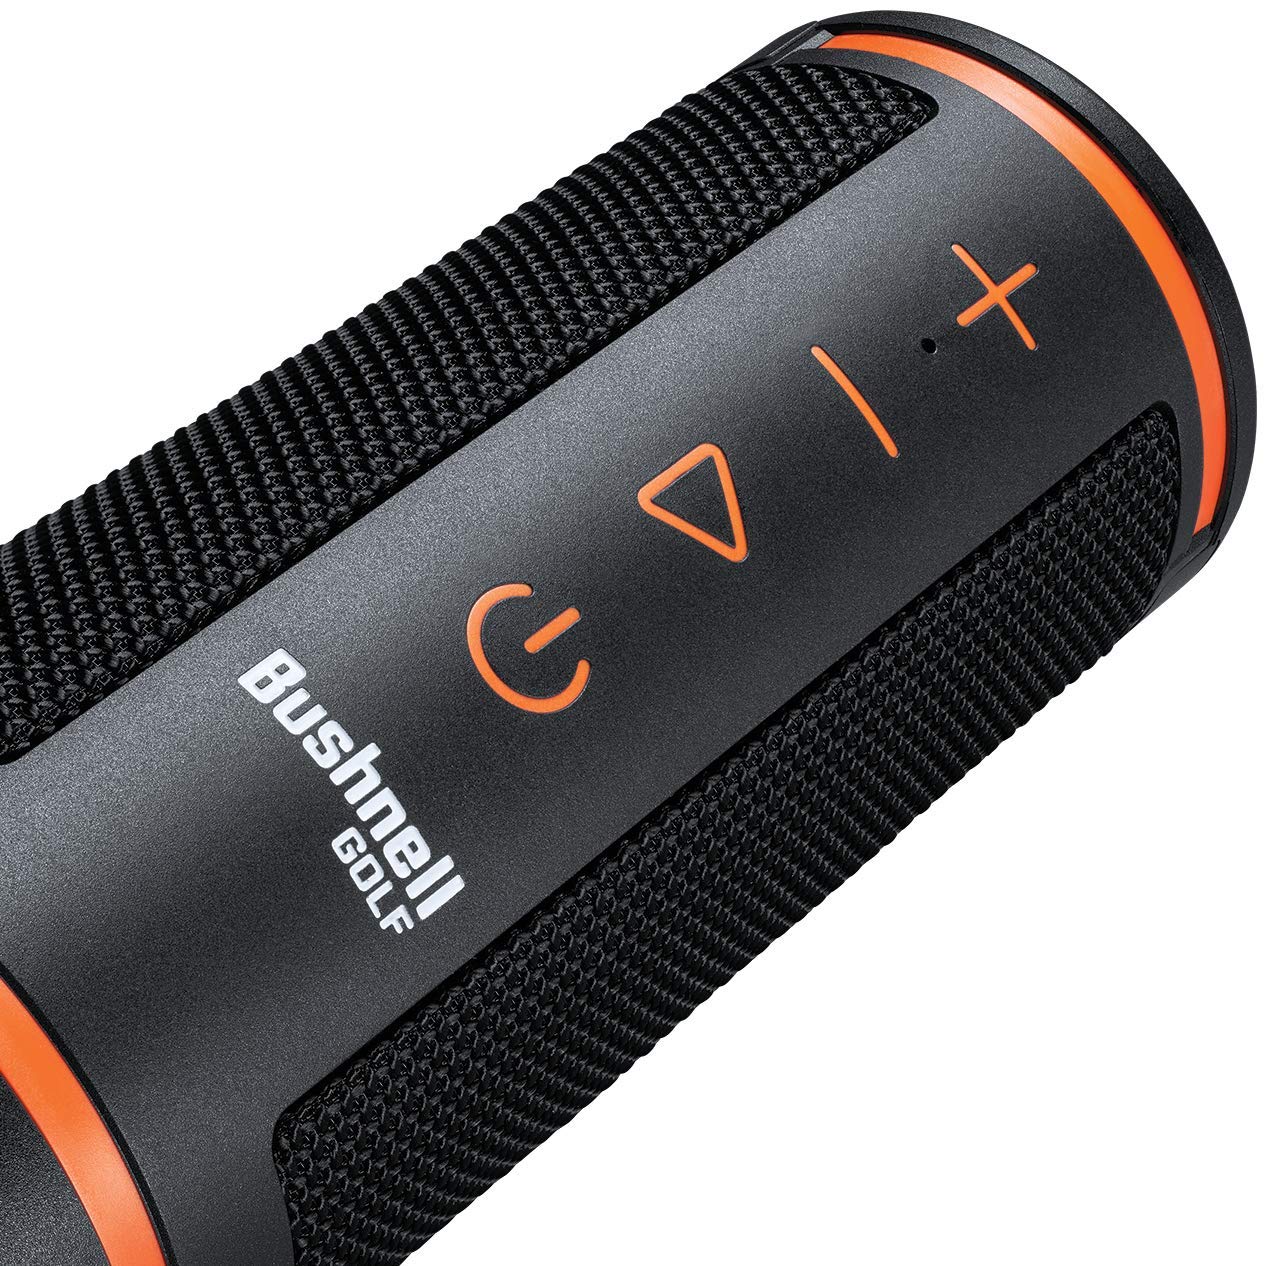 Bushnell Wingman GPS Golf Speaker Gift Box Bundle | Includes Wingman, Protective Wingman Pouch, Gift Box, Red Bow | Perfect Holiday Golf Gift | Bluetooth Music & Audible GPS Distances | 361910